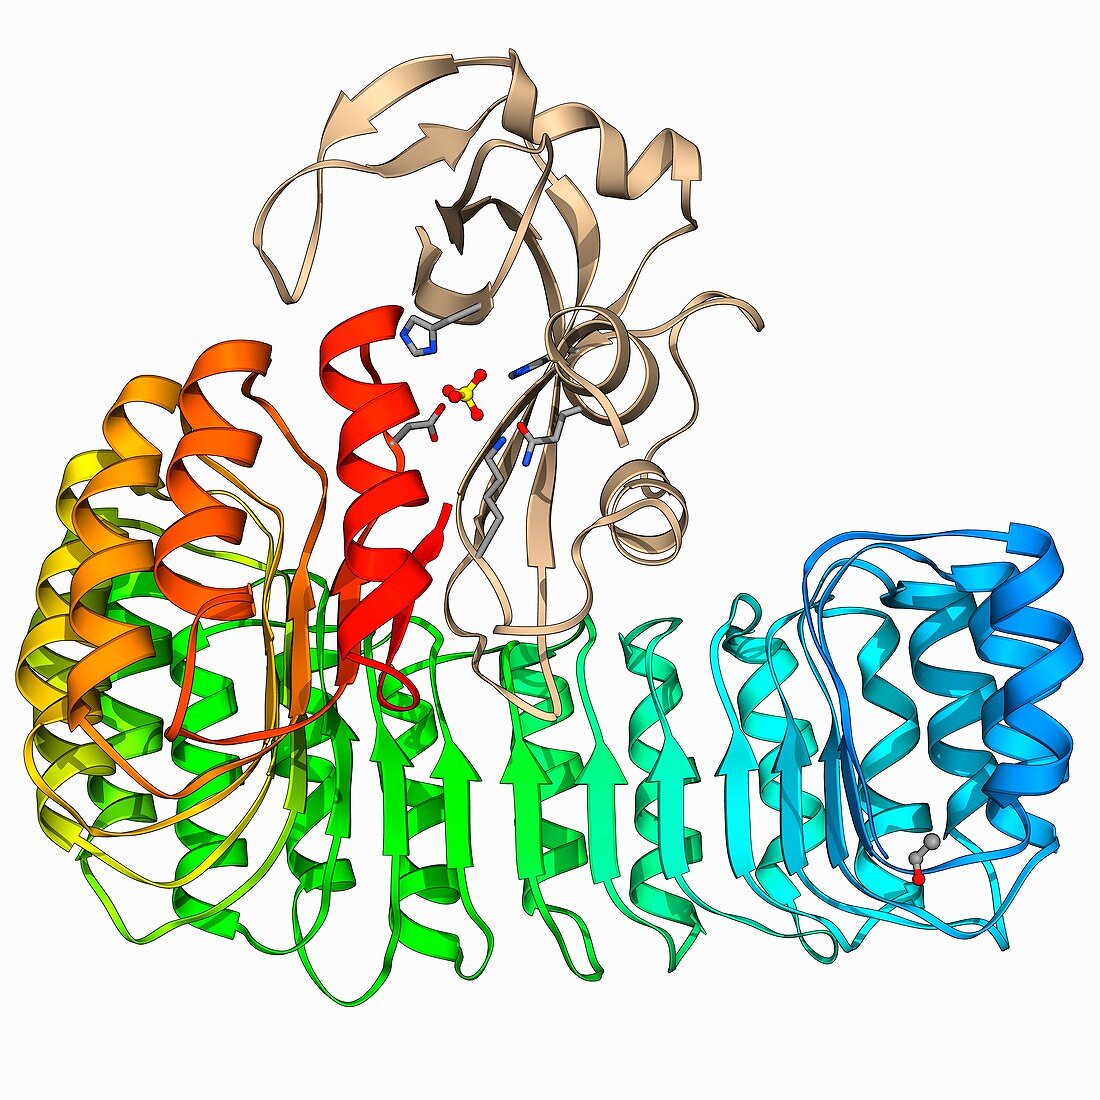 Ribonuclease bound to inhibitor